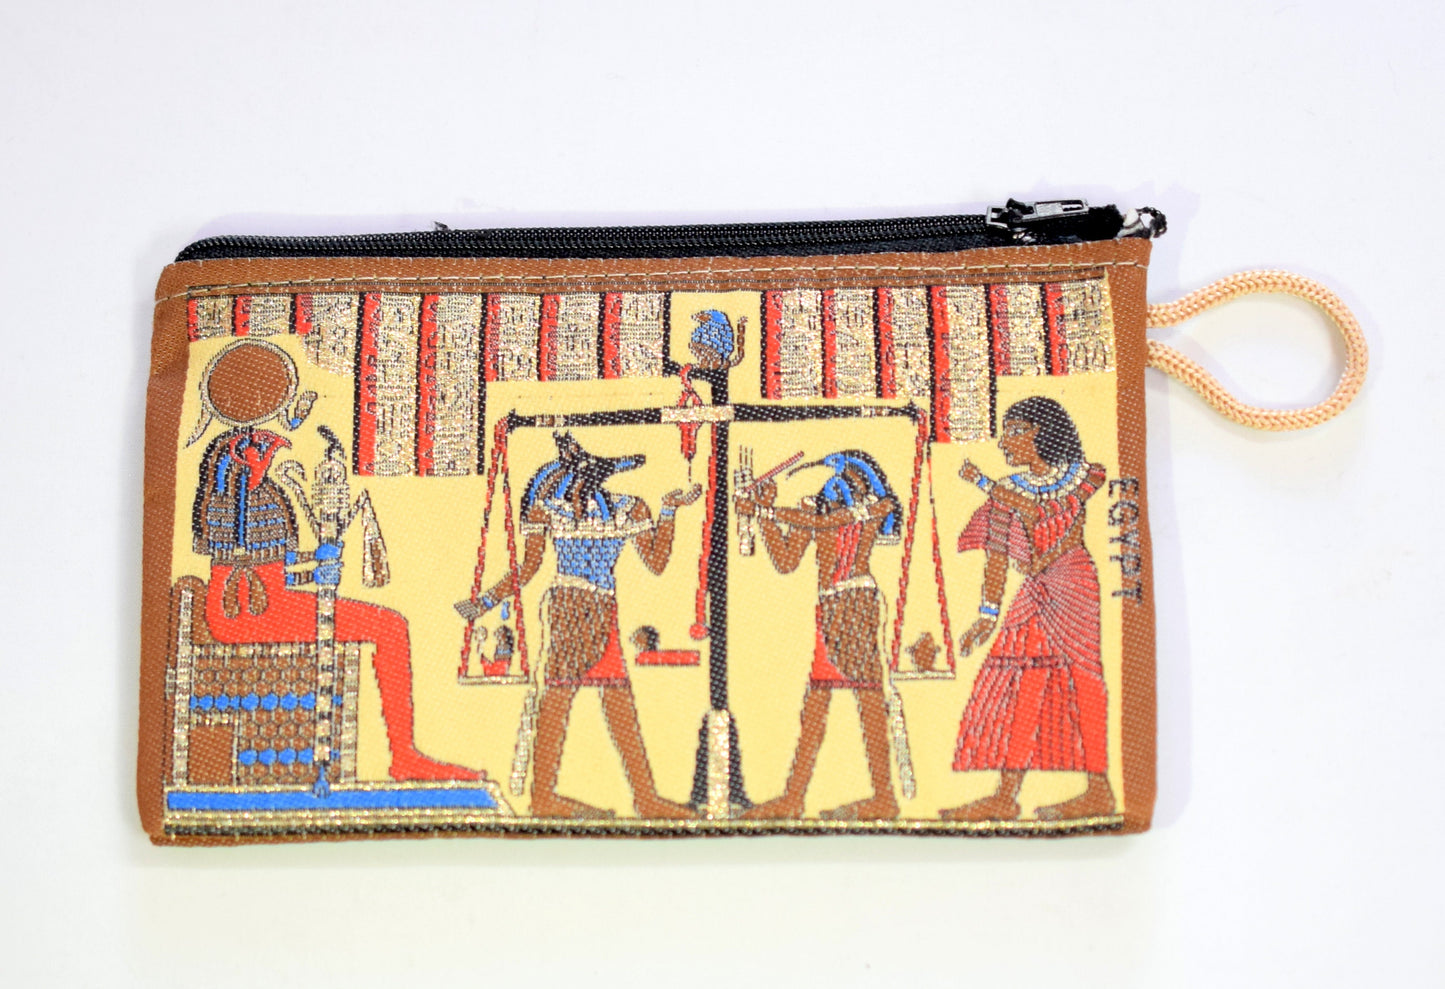 Egyptian Fabric Wallet zipper 4x5.5 Inches Coin Bag Double Face Art Picture it is a piece of art gift for everyone